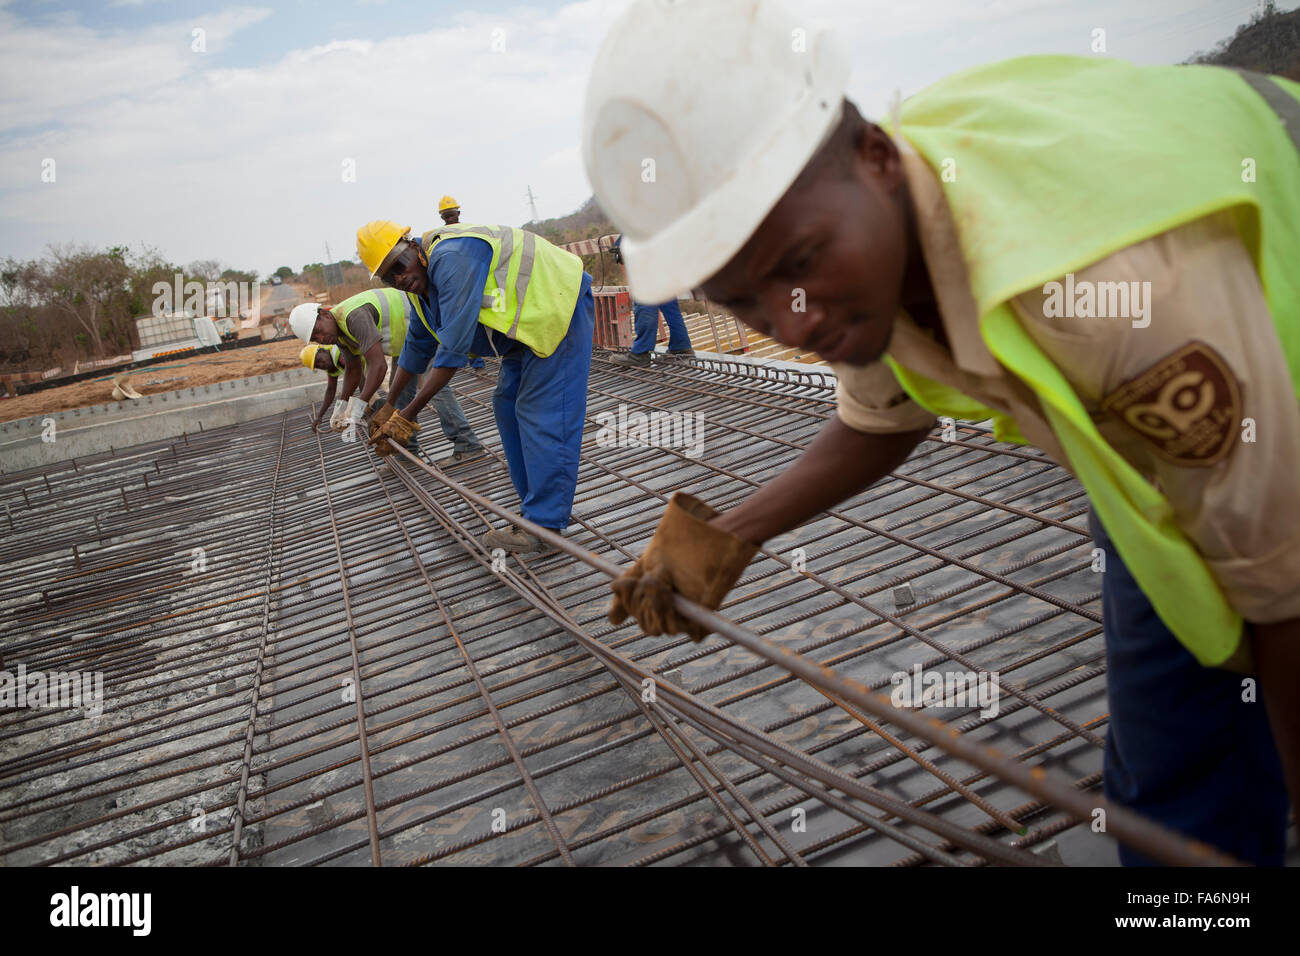 Construction workers rehabilitate an aging bridge along the Namialo to Rio Lurio Road in Northern Mozambique, SE Africa. Stock Photo